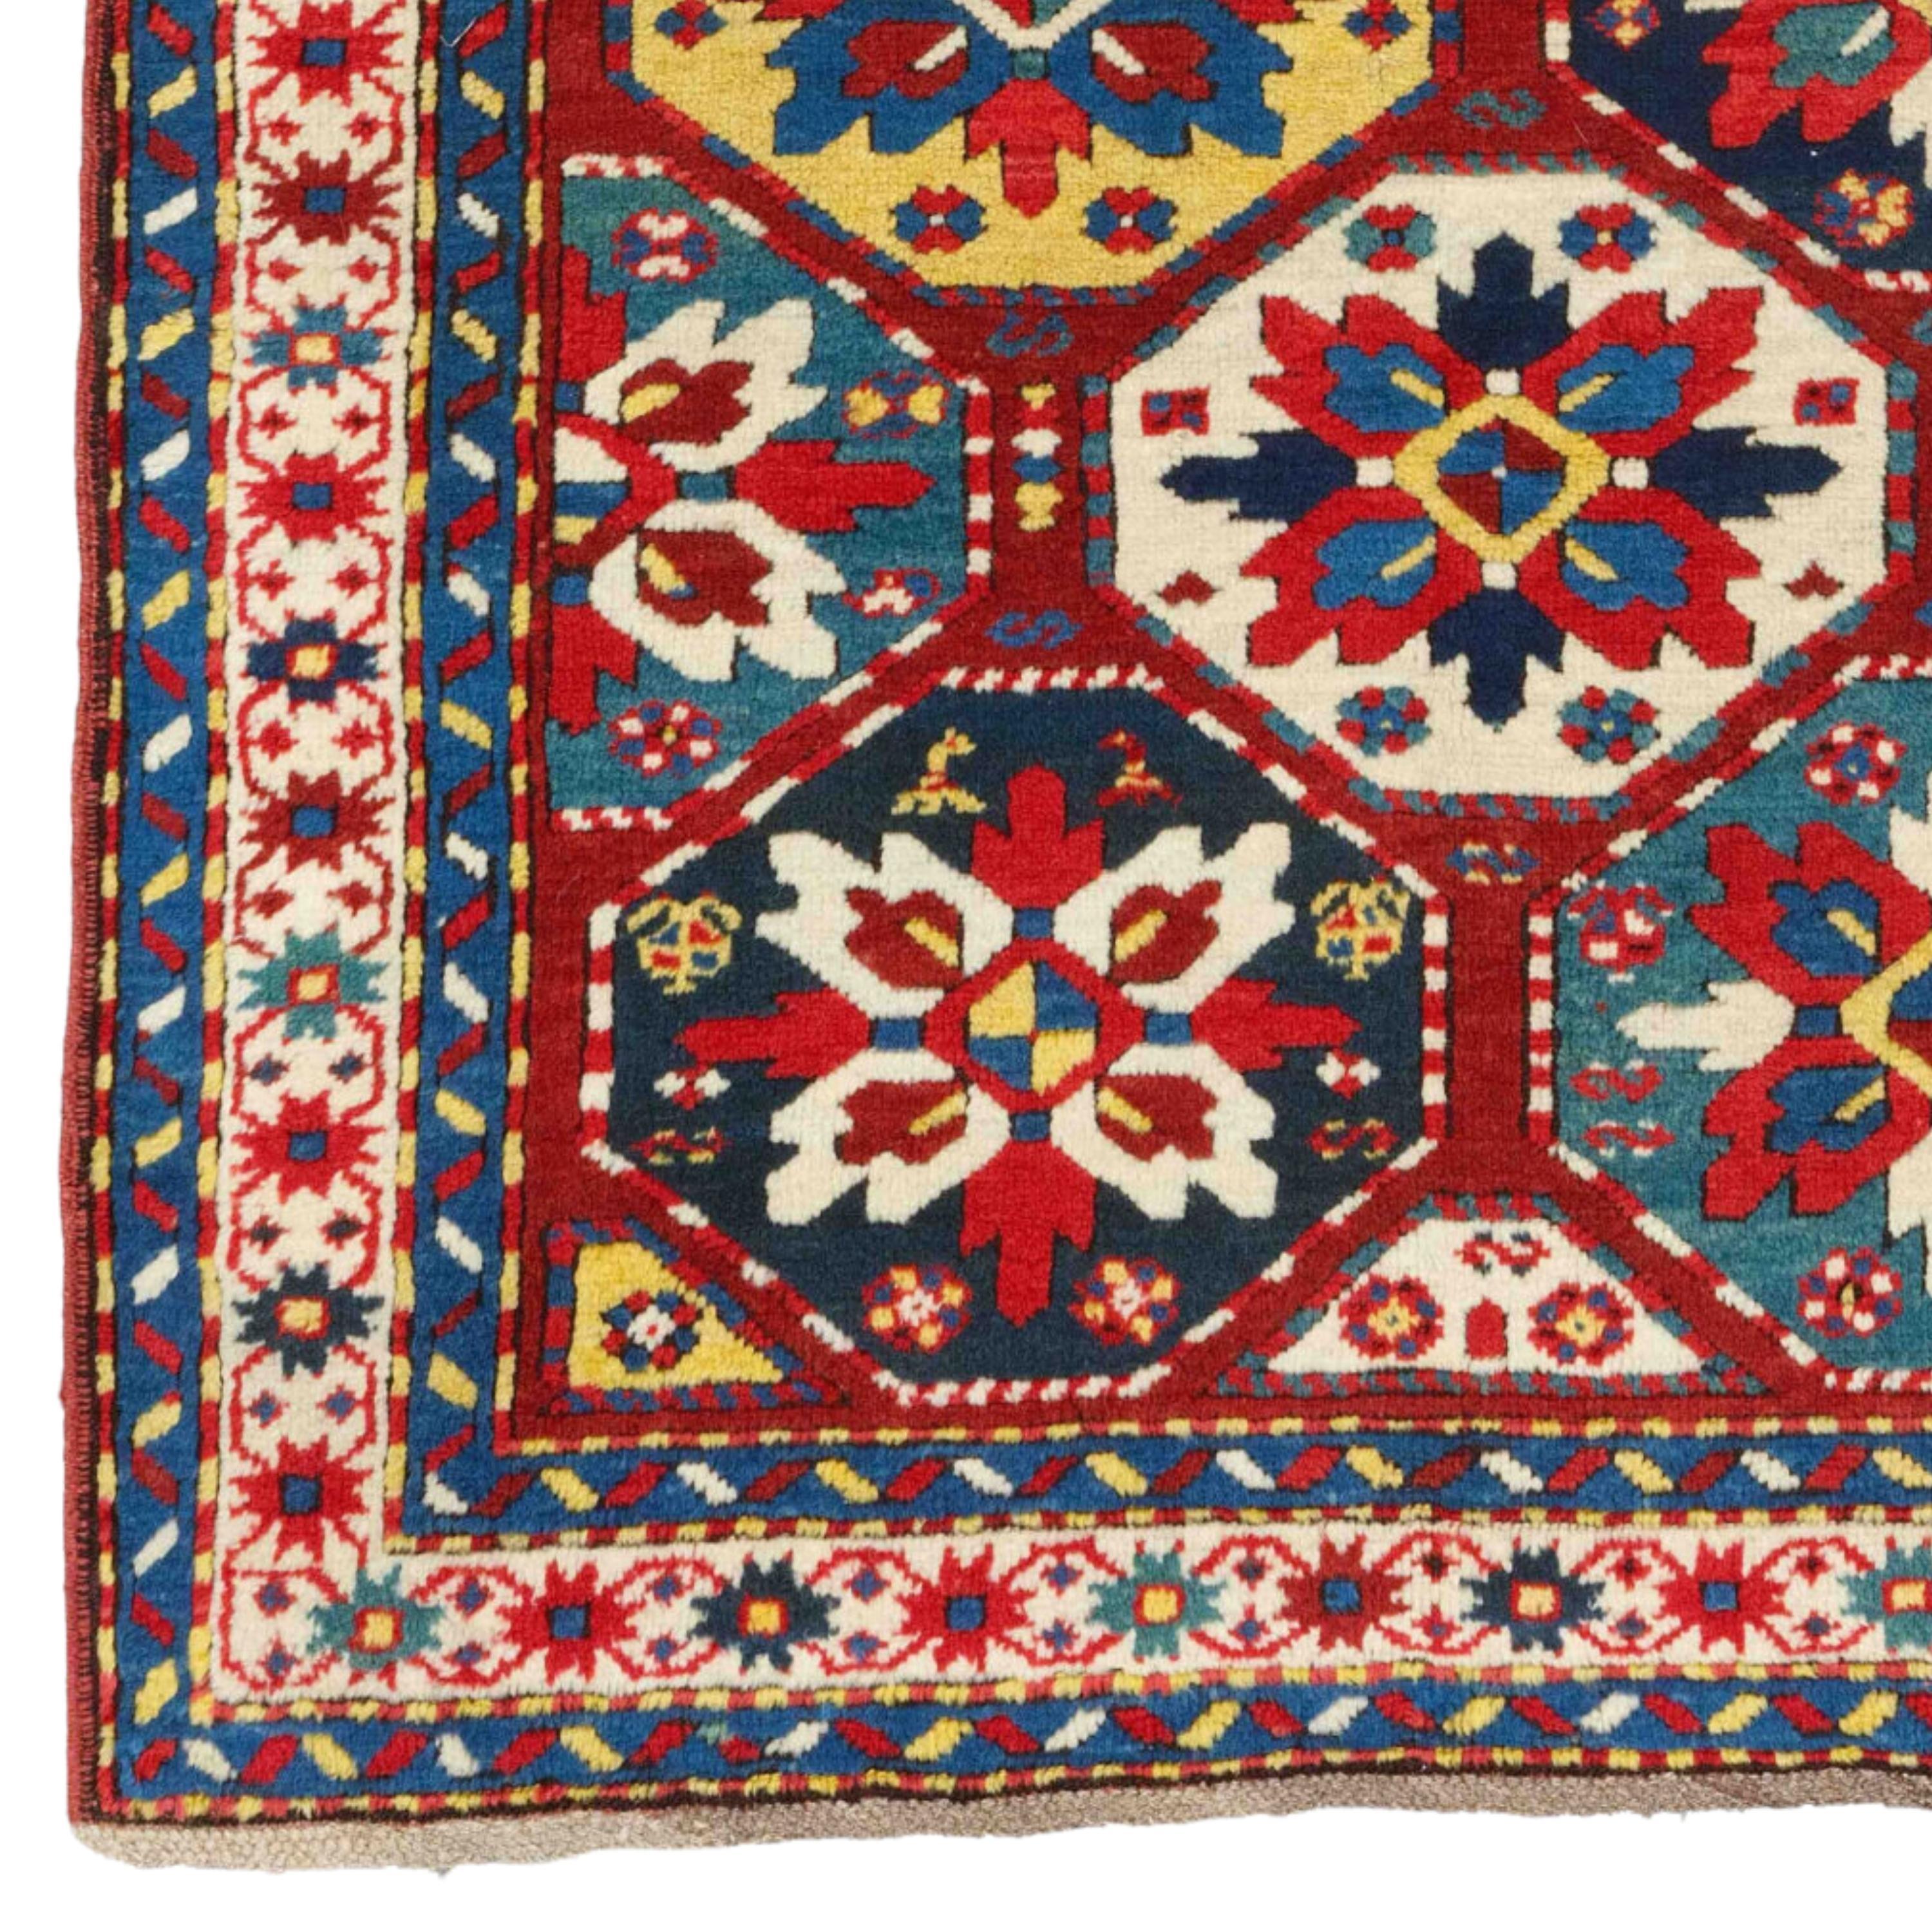 Middle of 19th Century Eagle Group Caucasian Rug
Size 115 x 195 cm (3,77 - 6,39 ft)

This magnificent carpet is a rare and highly sought-after Eagle Group Caucasian carpet woven in the Karabakh region in the mid-19th century. At the center of the